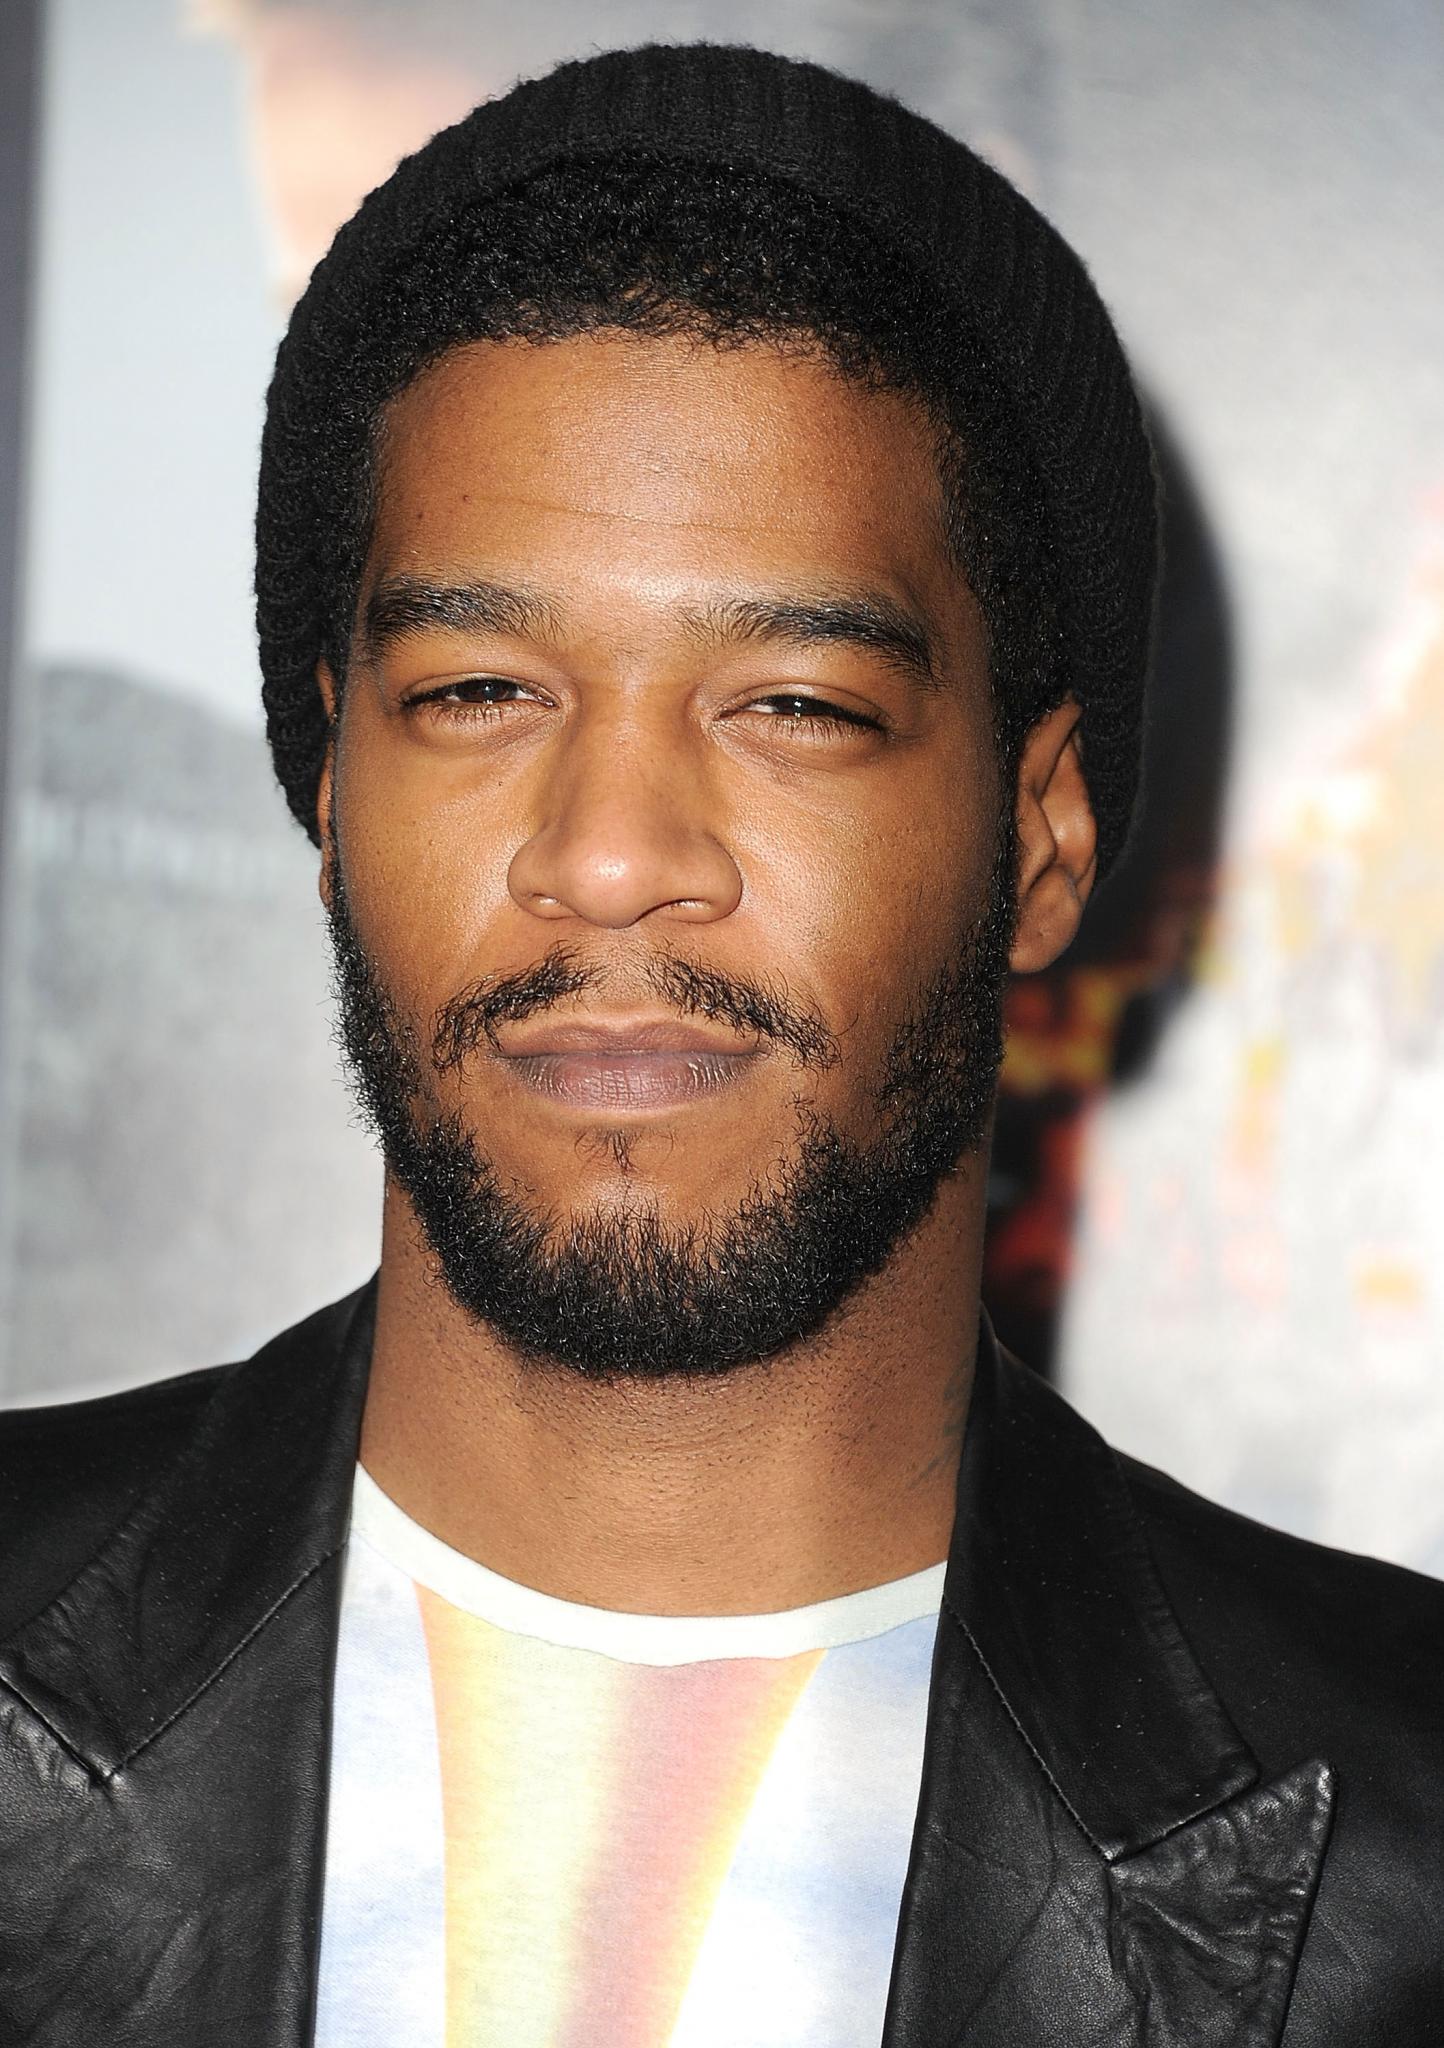 Kid Cudi Says Hip-Hop Artists Are ‘Least Outspoken’ on Gay Rights
